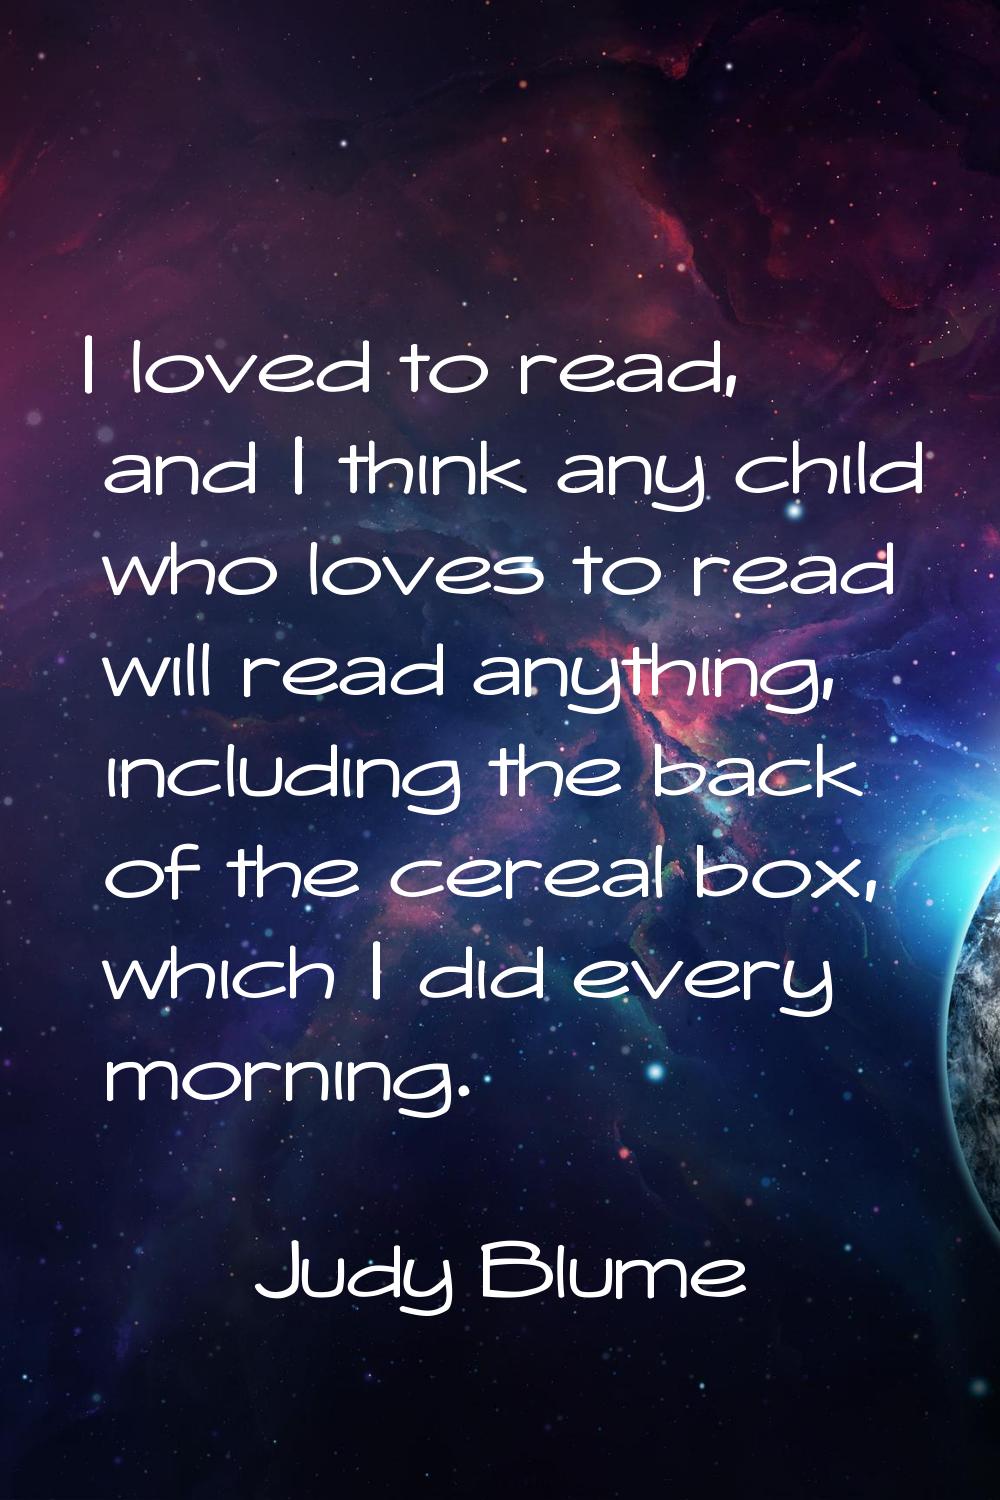 I loved to read, and I think any child who loves to read will read anything, including the back of 